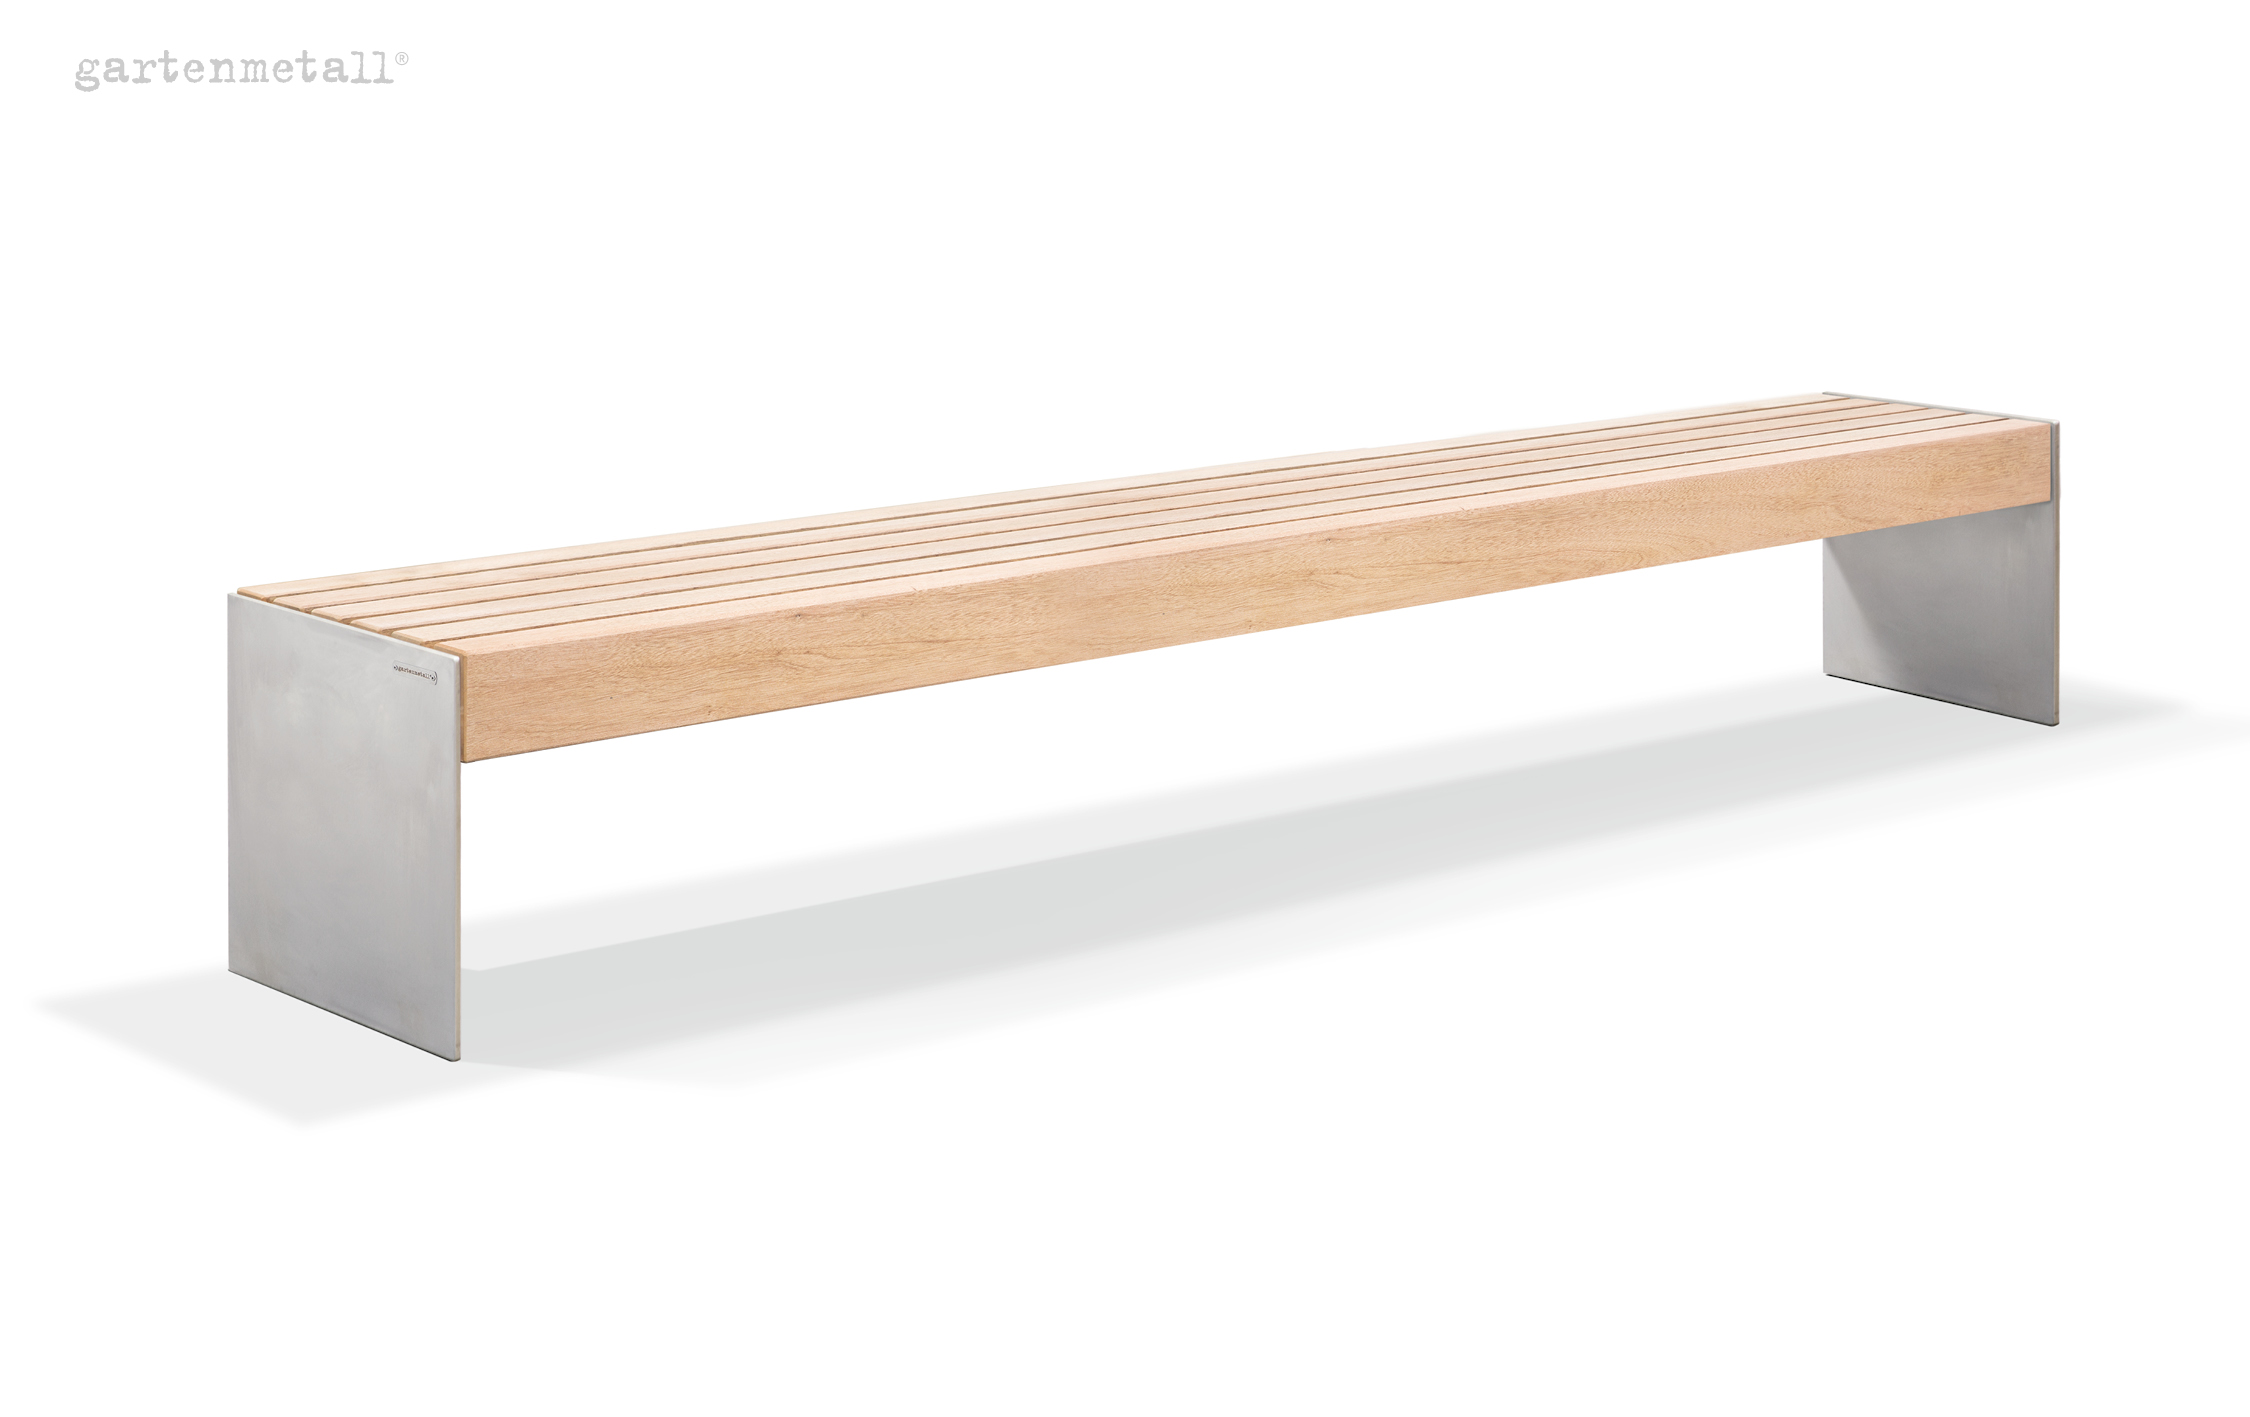 Bench type KEMPTEN 3.0 m with seat support hardwood